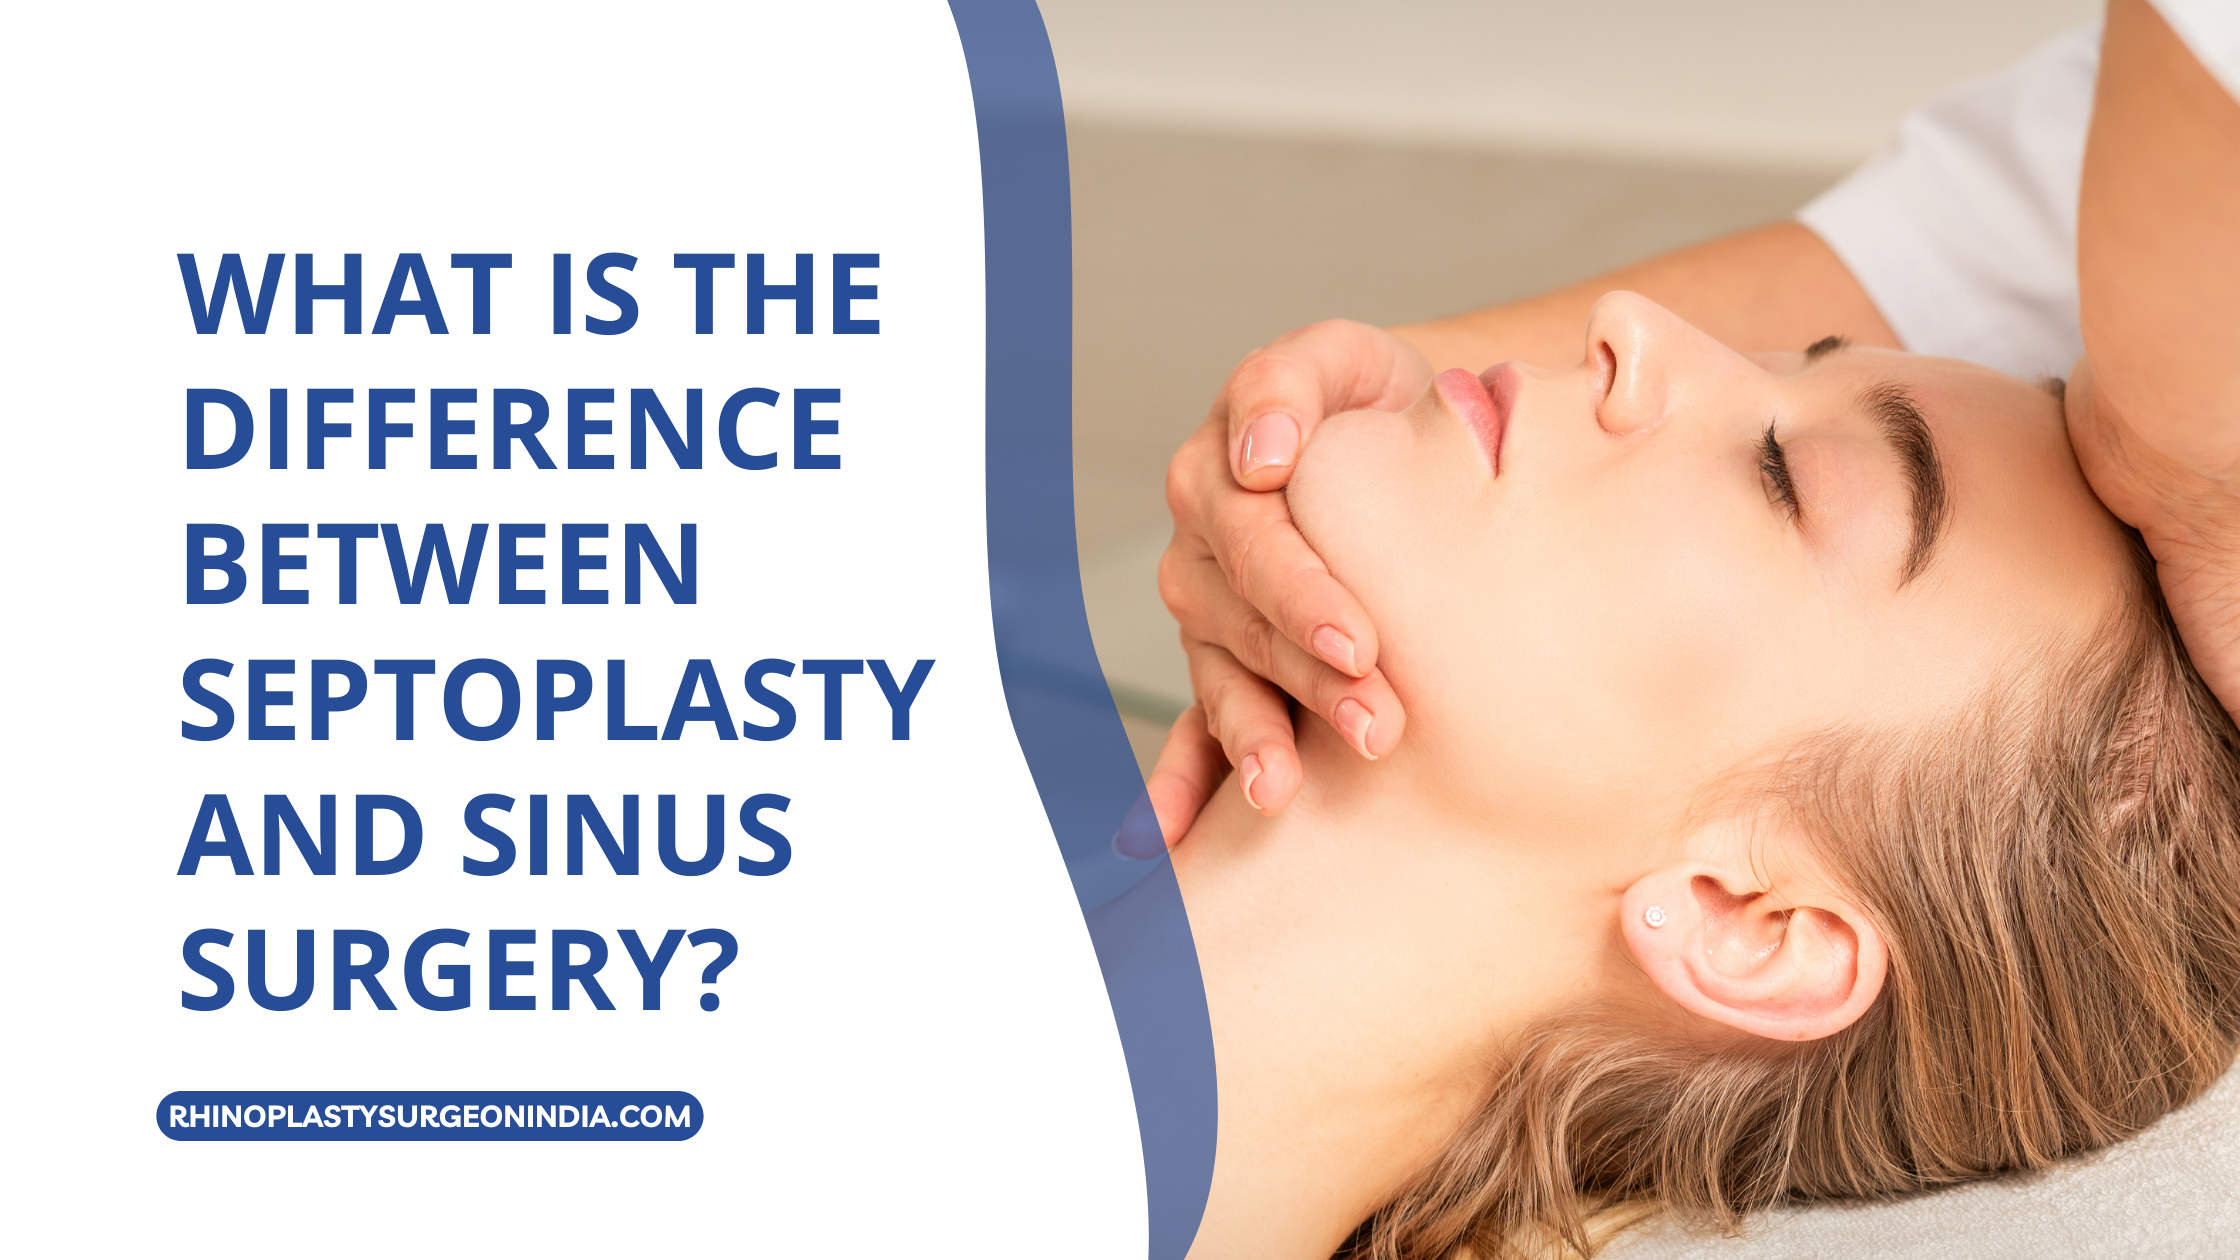 What is the Difference between Septoplasty and Sinus Surgery?